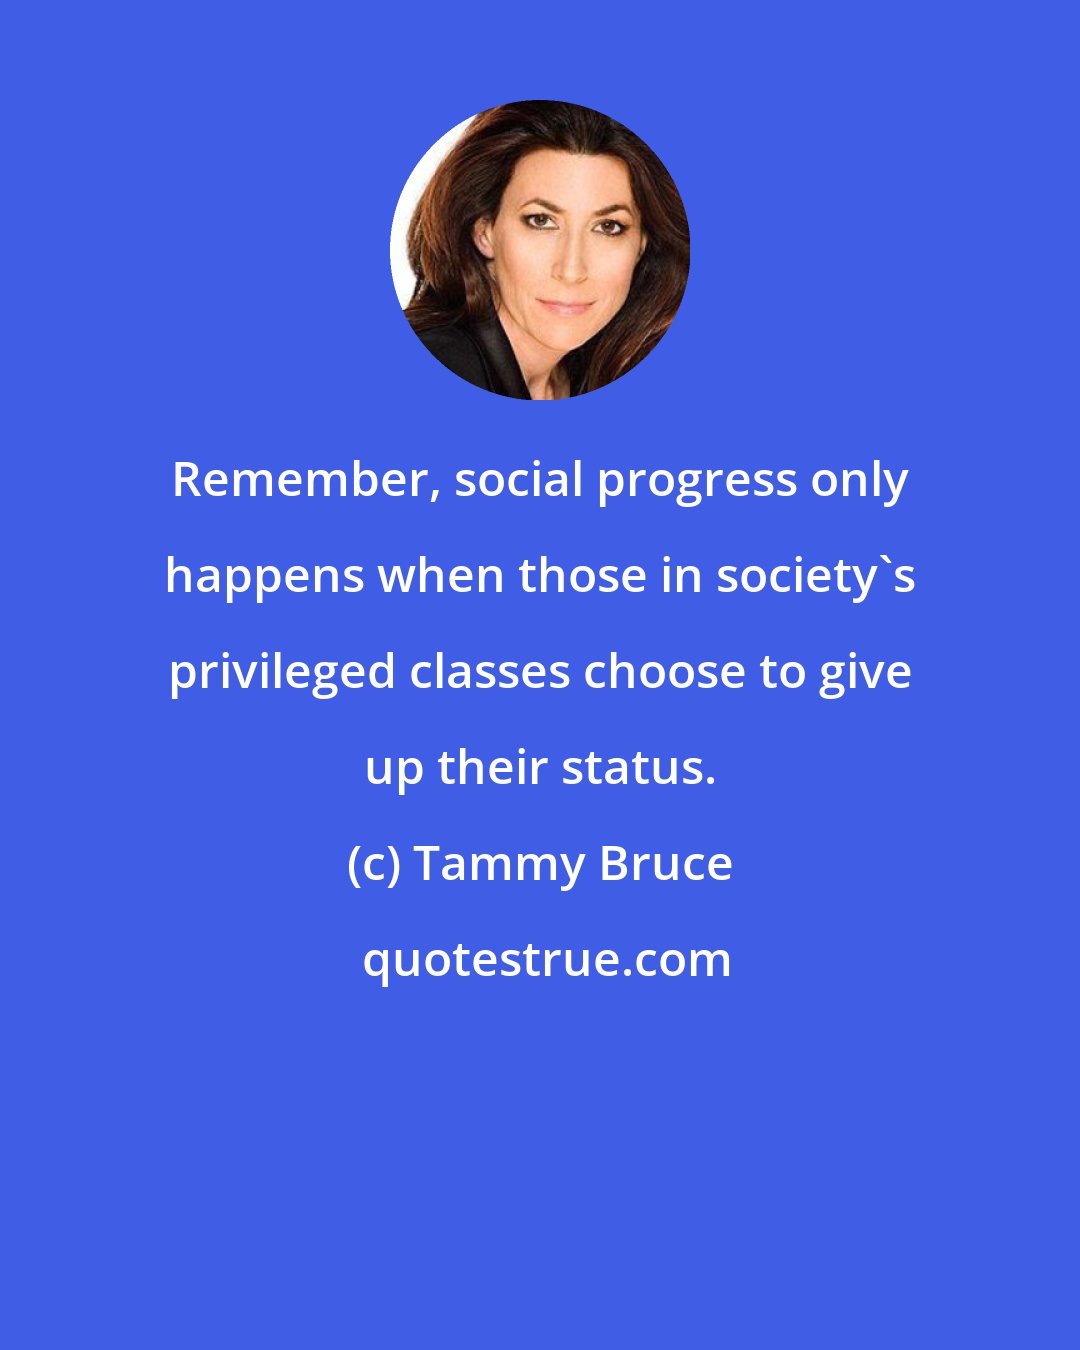 Tammy Bruce: Remember, social progress only happens when those in society's privileged classes choose to give up their status.